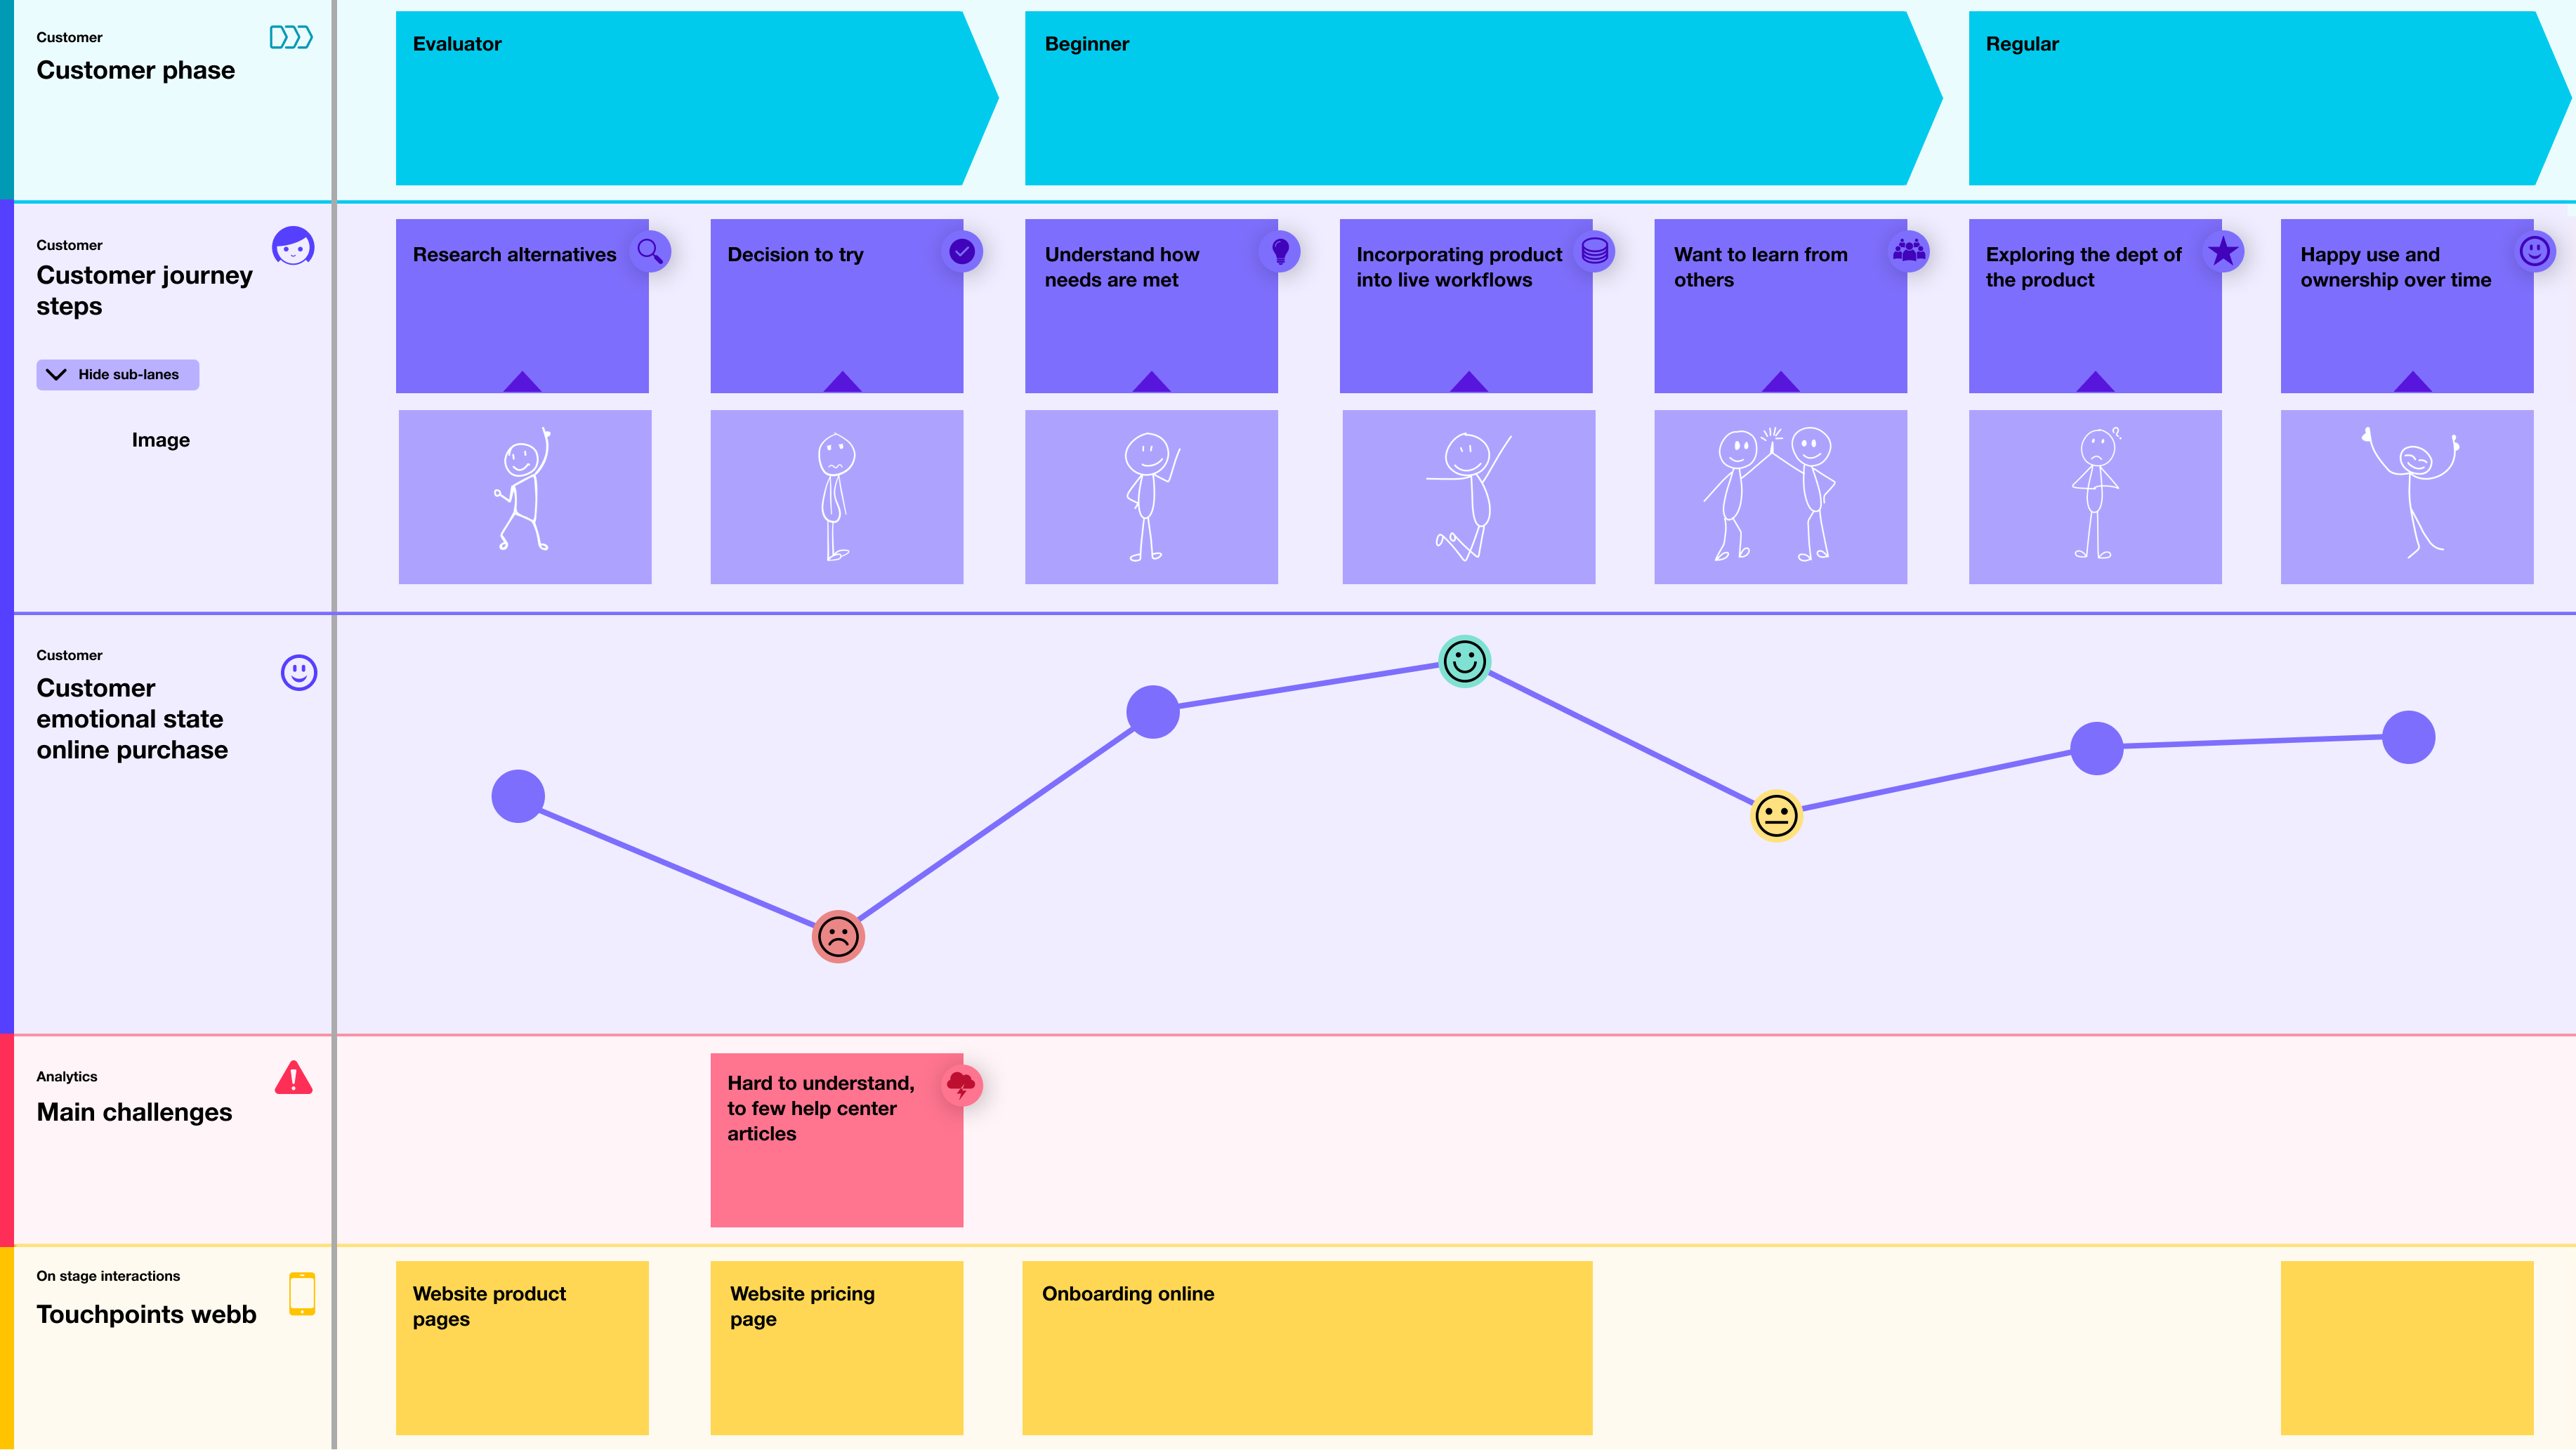 A journey map showing the possibility to create sub-lanes to include more data around a specific event or touchpoint.